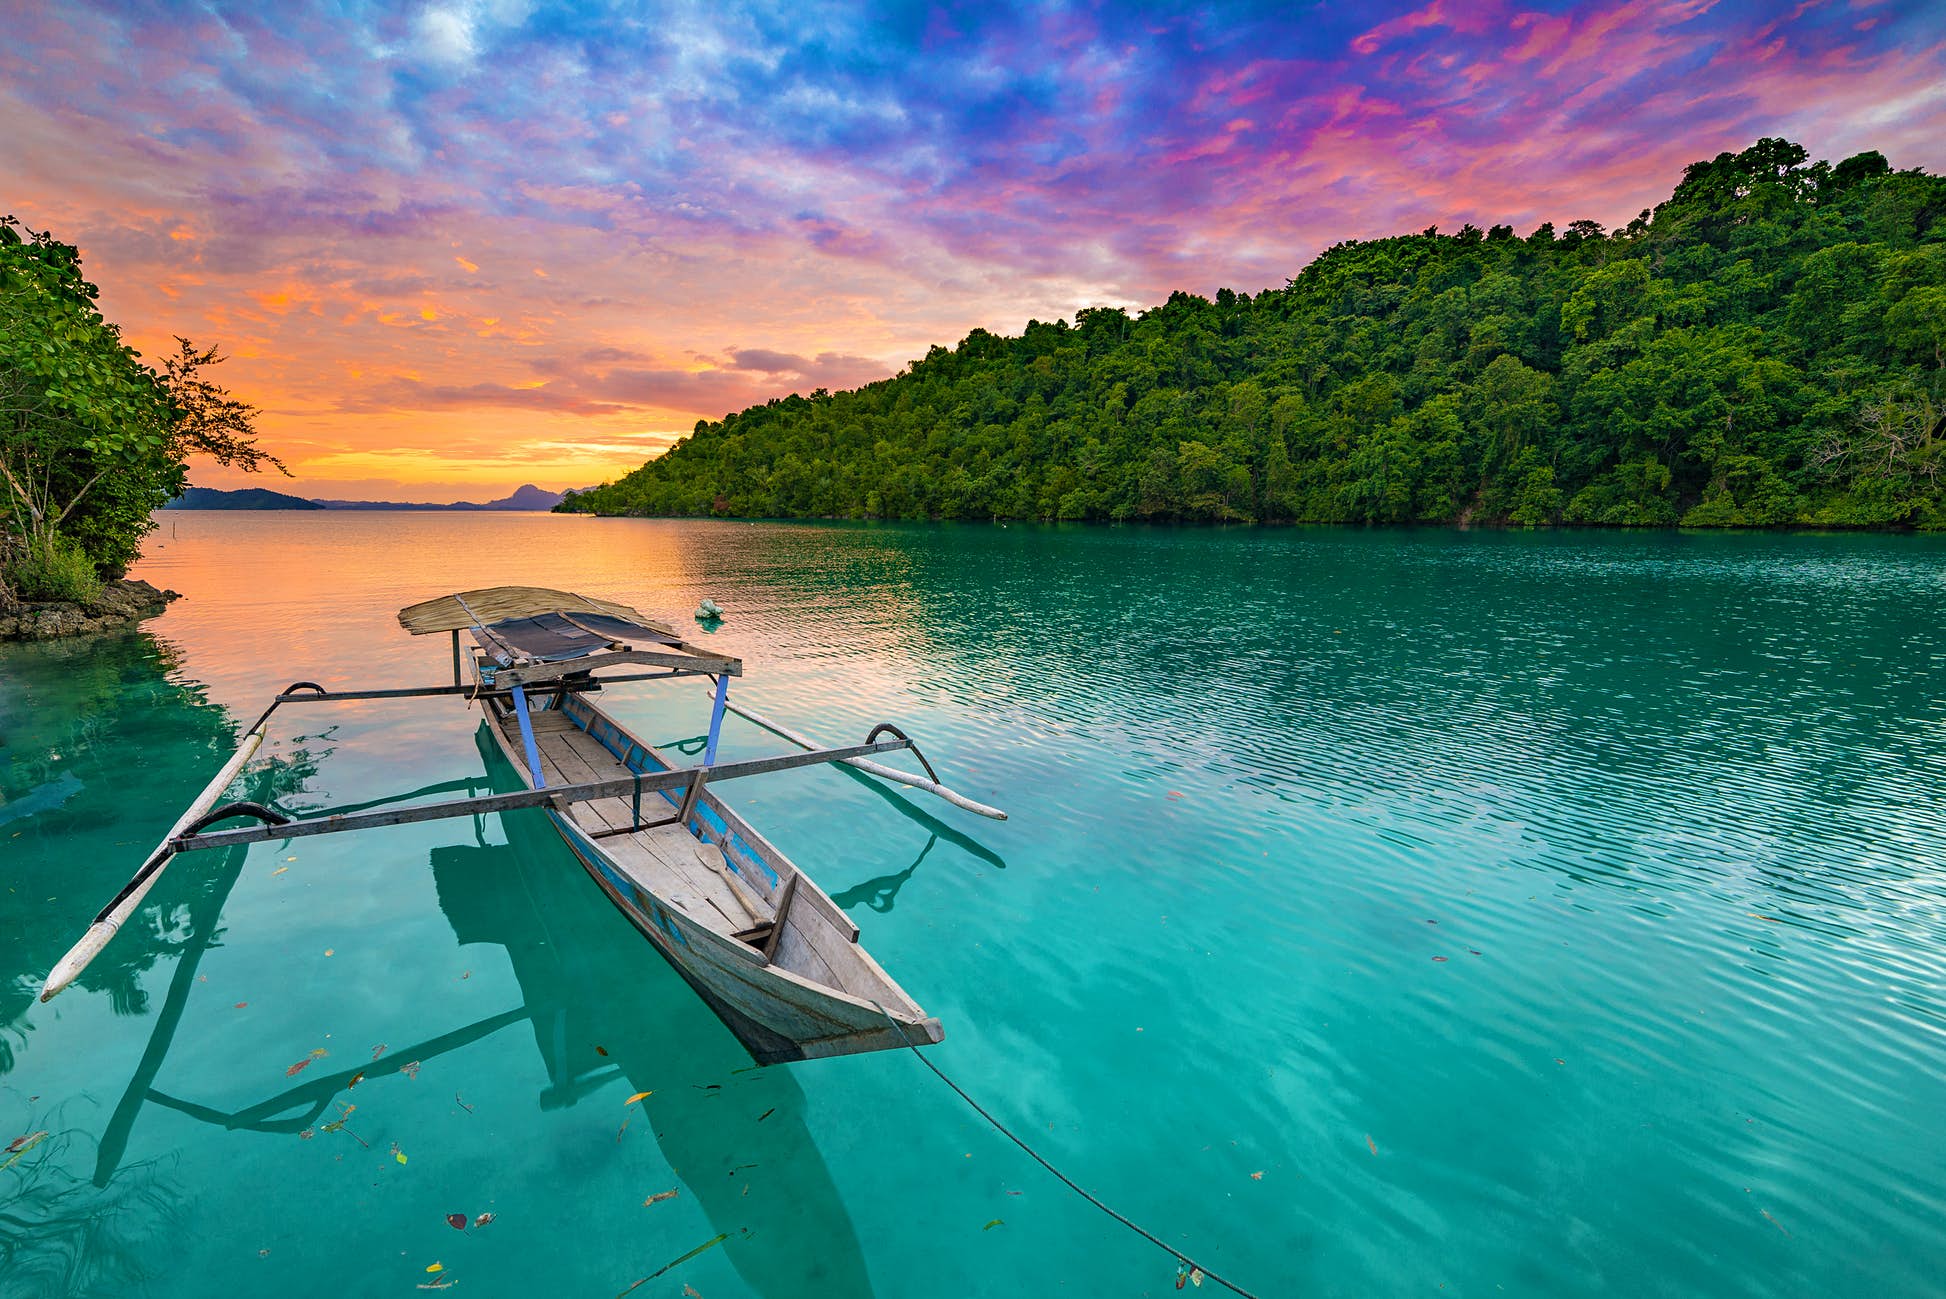 A small boat on still water during sunset at the Togian Islands. ©Fabio Lamanna/Shutterstock